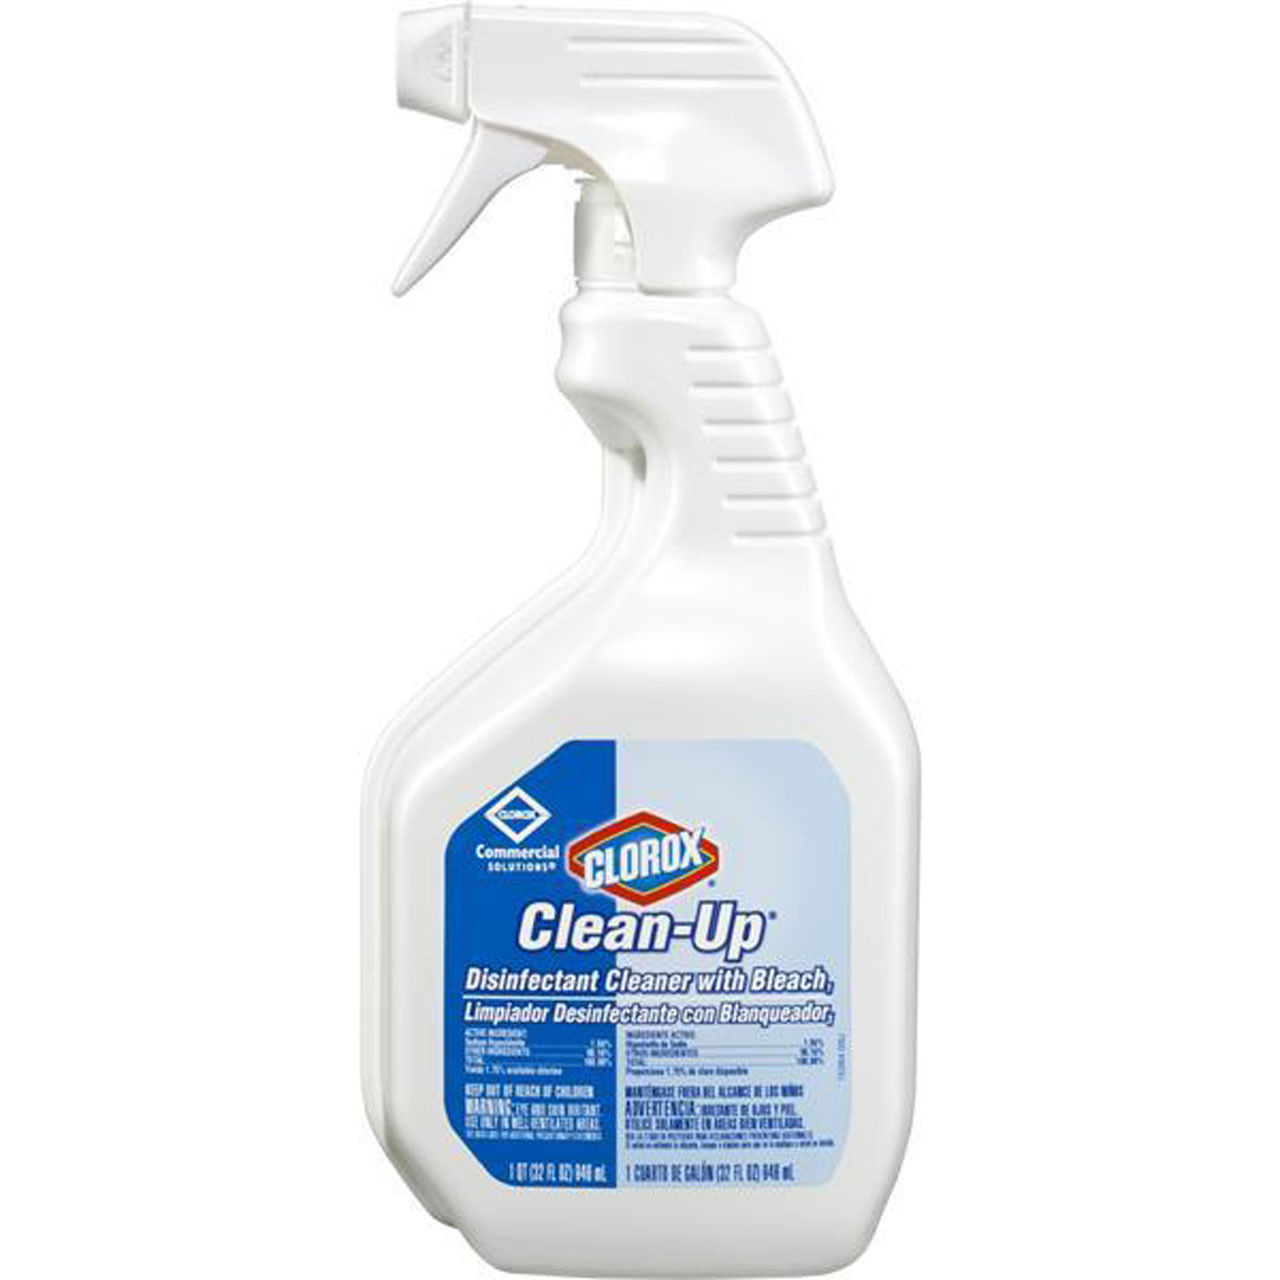 What is the Clorox Clean-Up Disinfectant Spray Cleaner With Bleach?